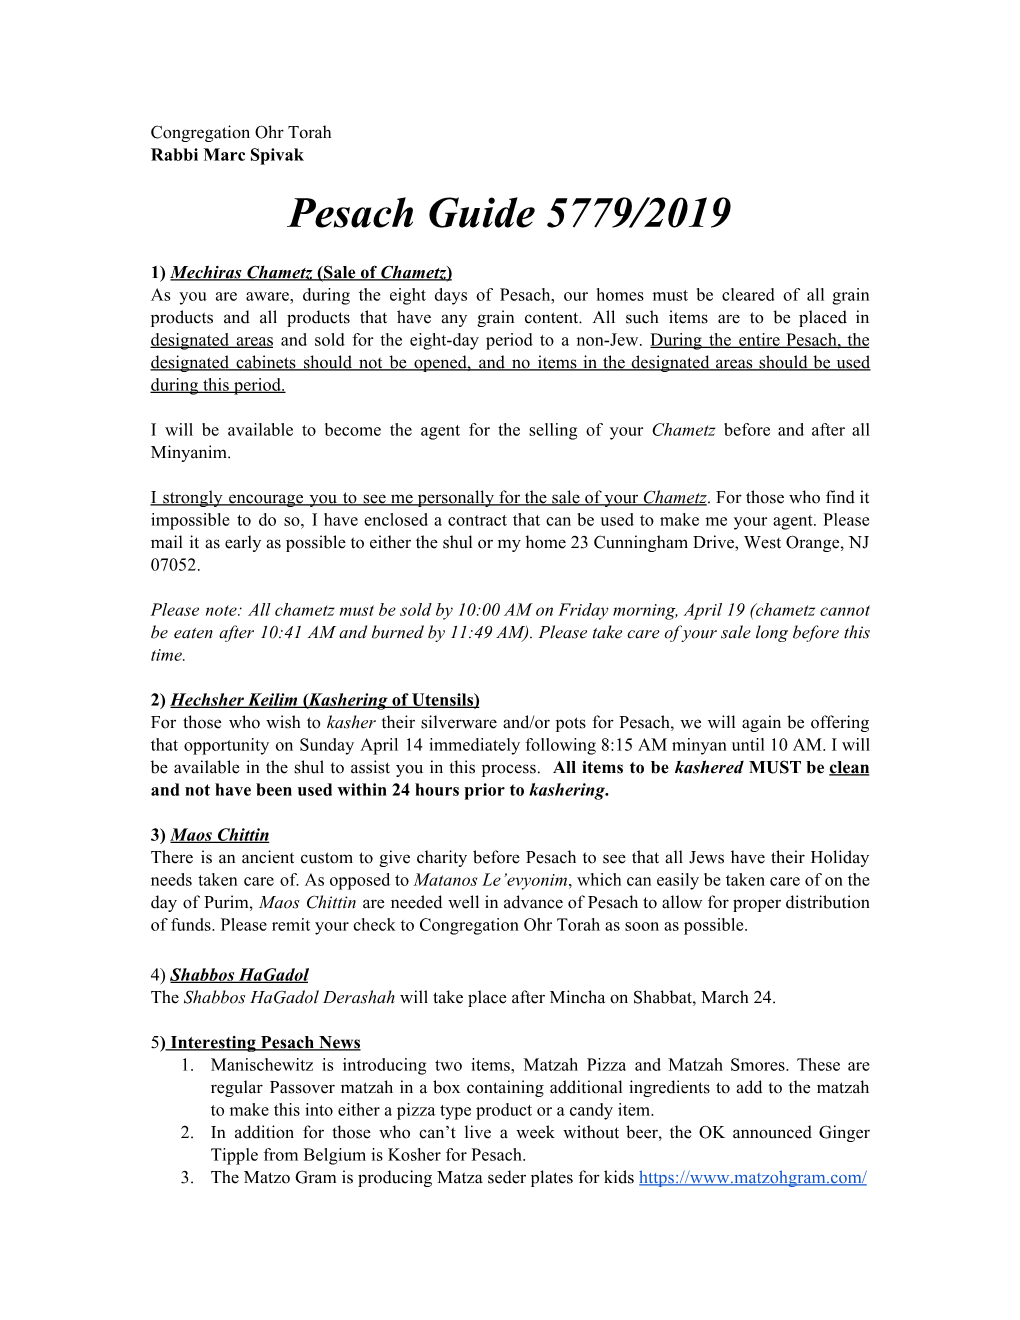 Pesach Guide 5779/2019